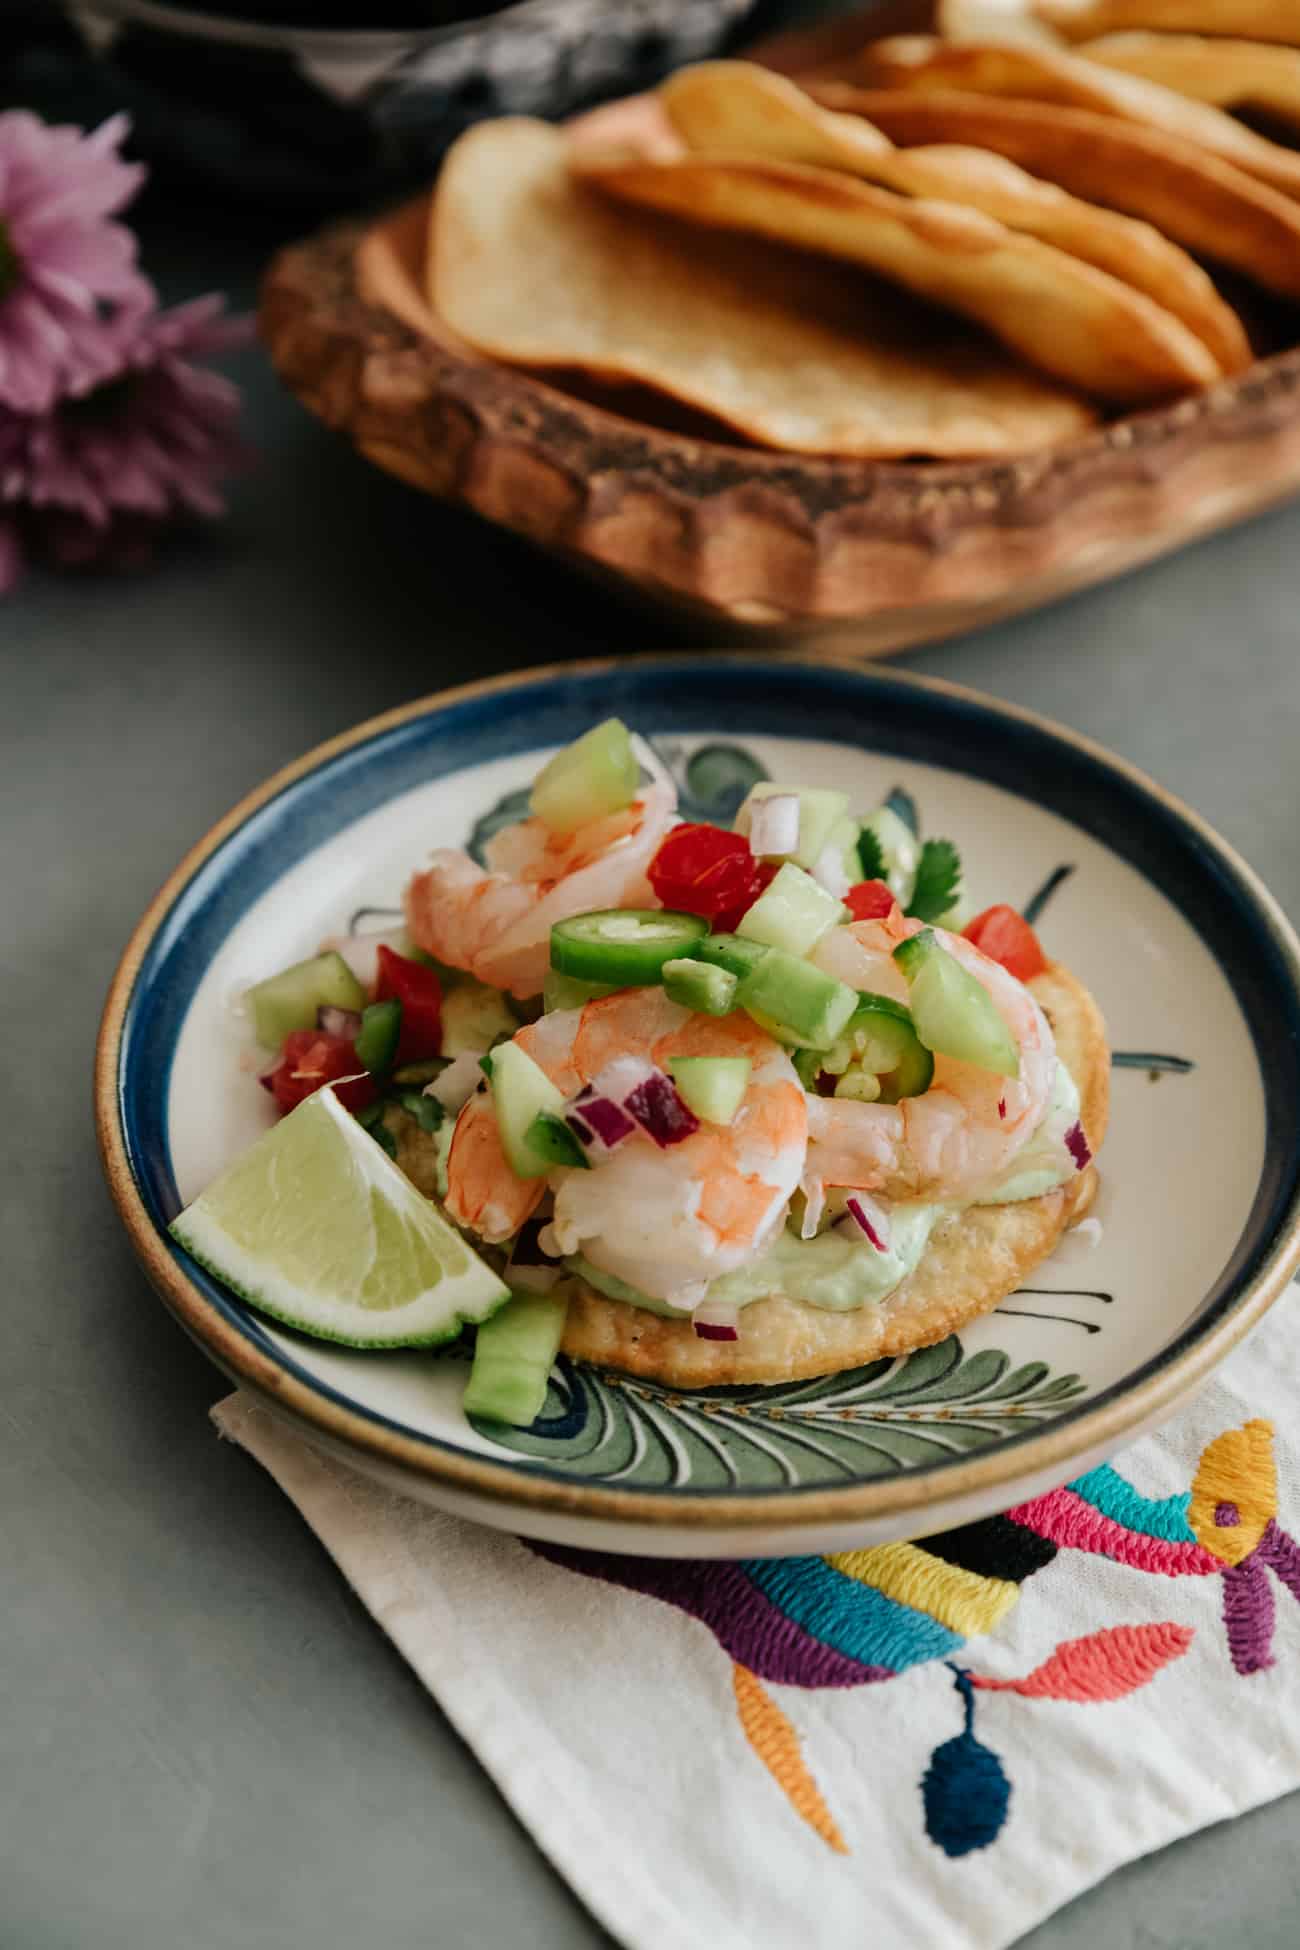 shrimp ceviche topped on a tostada on a painted Mexican plate and tostadas in the background.